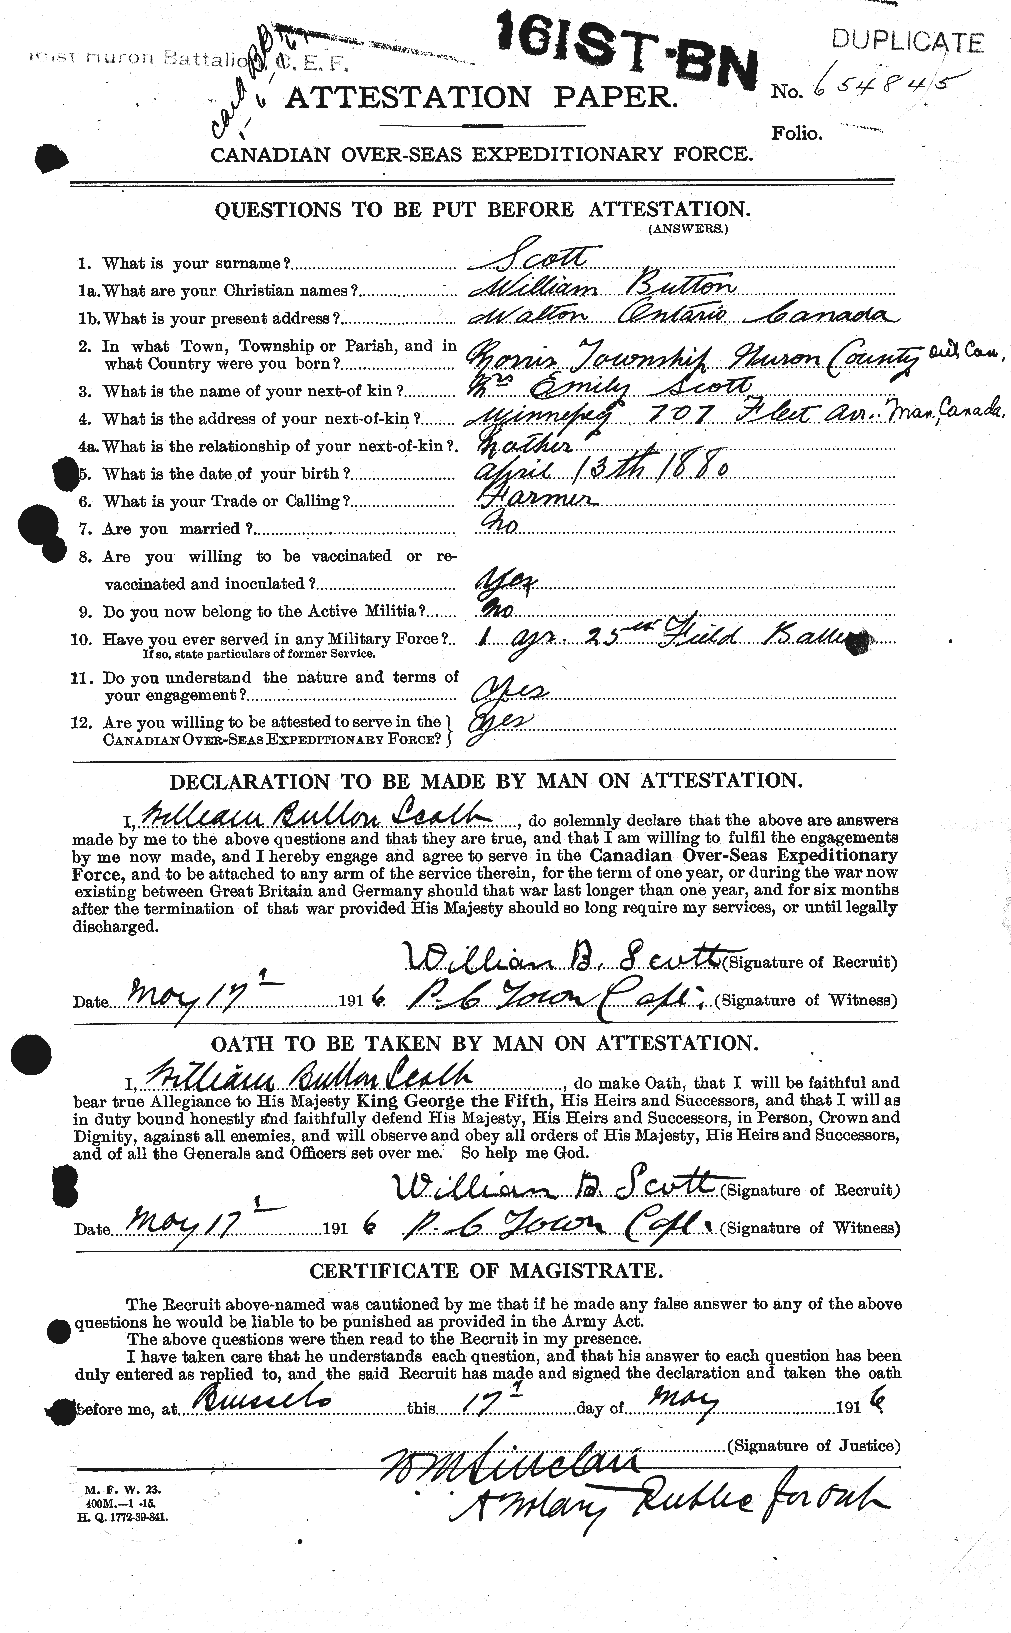 Personnel Records of the First World War - CEF 087046a